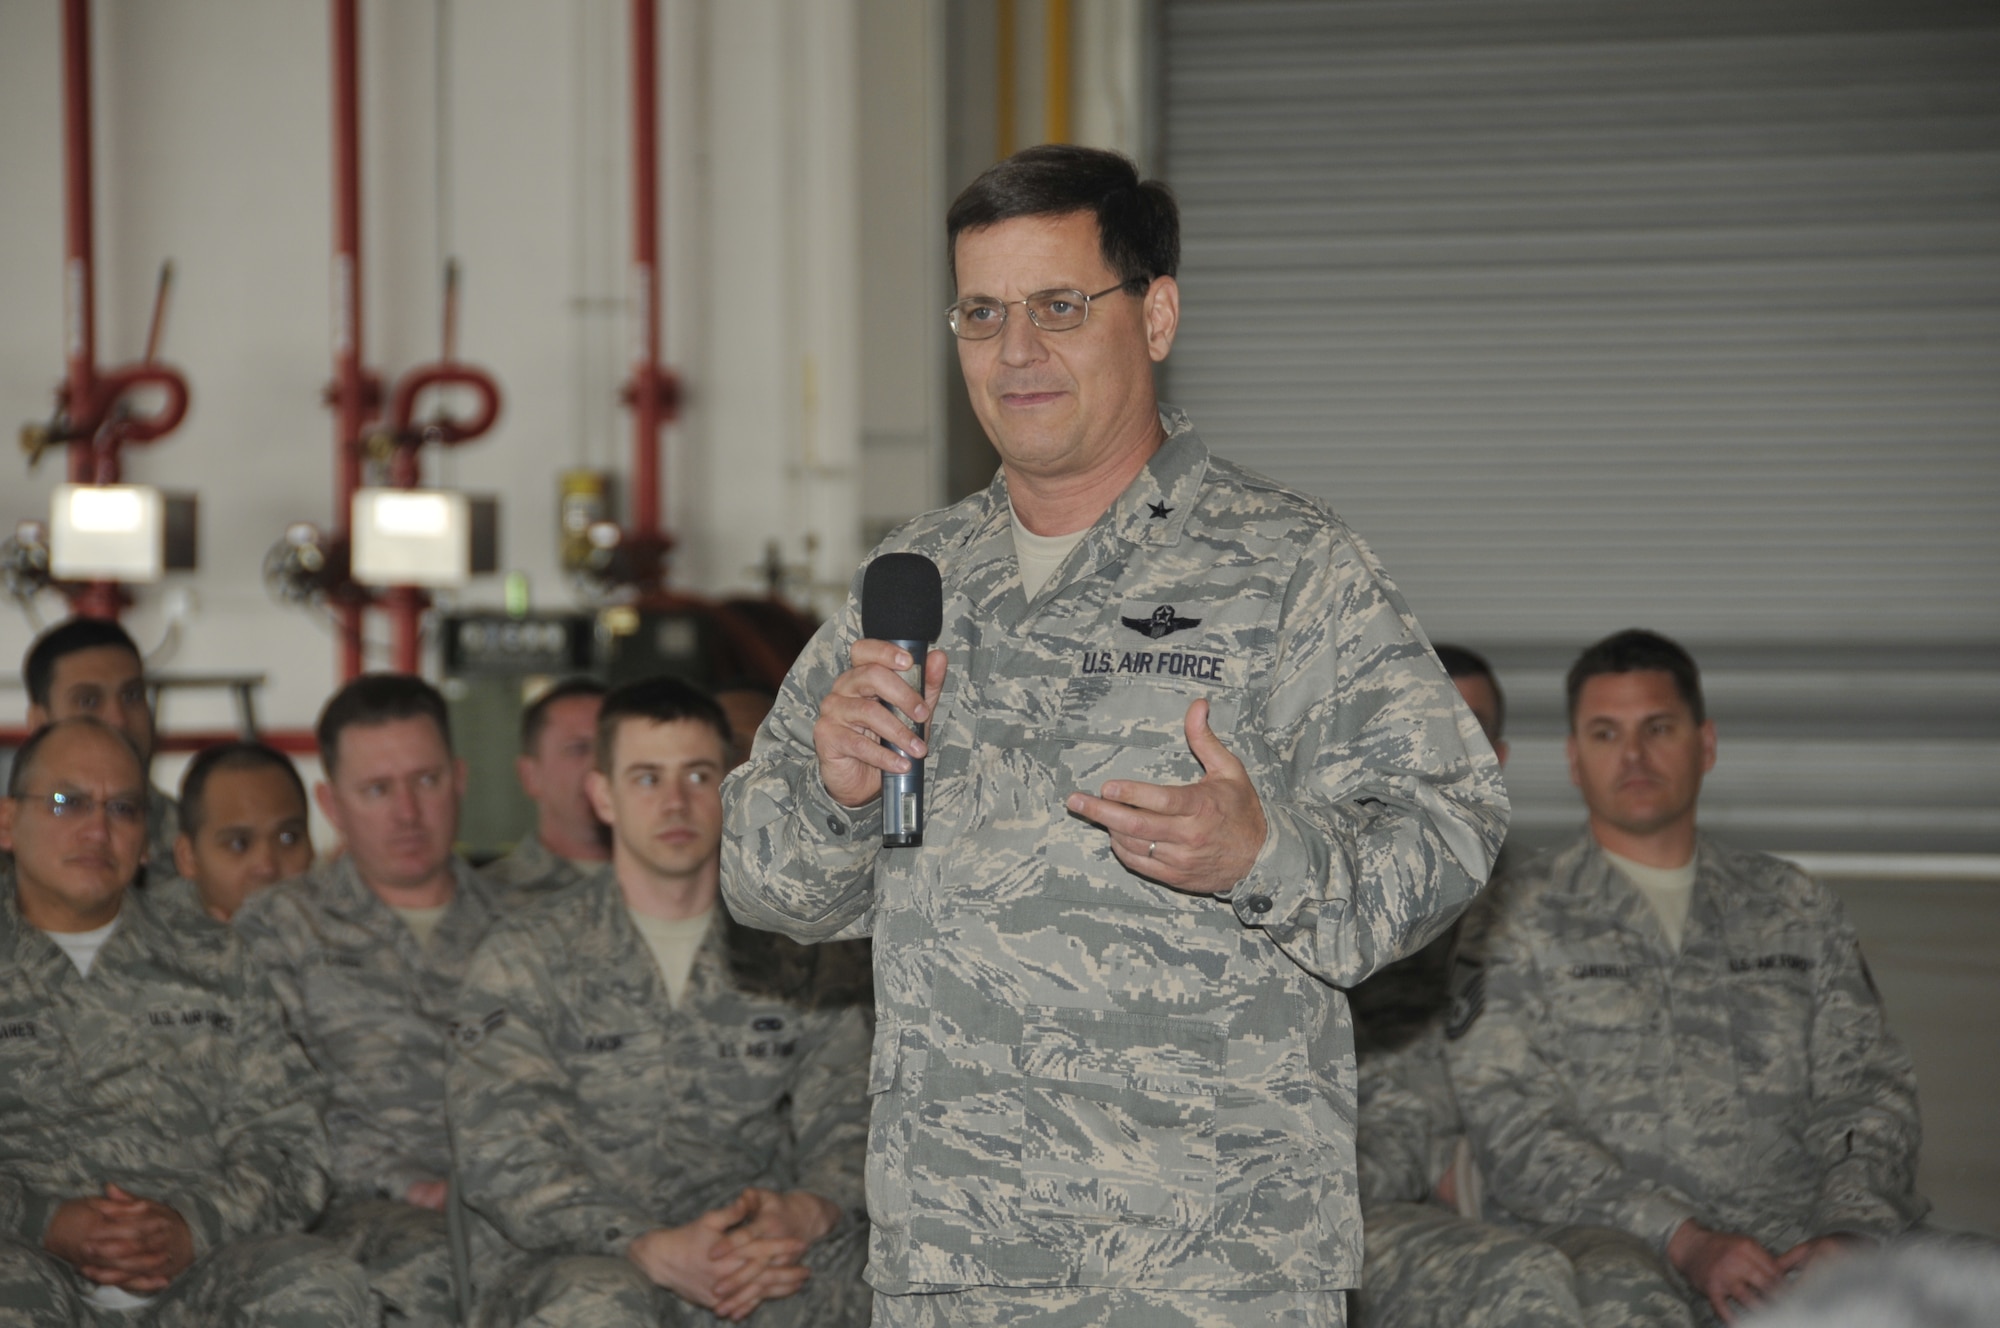 Brig. Gen. James C. Witham, commander of the California Air National Guard, conducts a town hall meeting with 129th Rescue Wing Airmen at Moffett Federal Airfield, Calif., Feb. 4, 2012. This is Witham’s first visit to the 129th since becoming the CA ANG commander and it gave Airmen an opportunity to ask questions about the future of the Guard. (Air National Guard photo by Staff Sgt. Kim E. Ramirez)